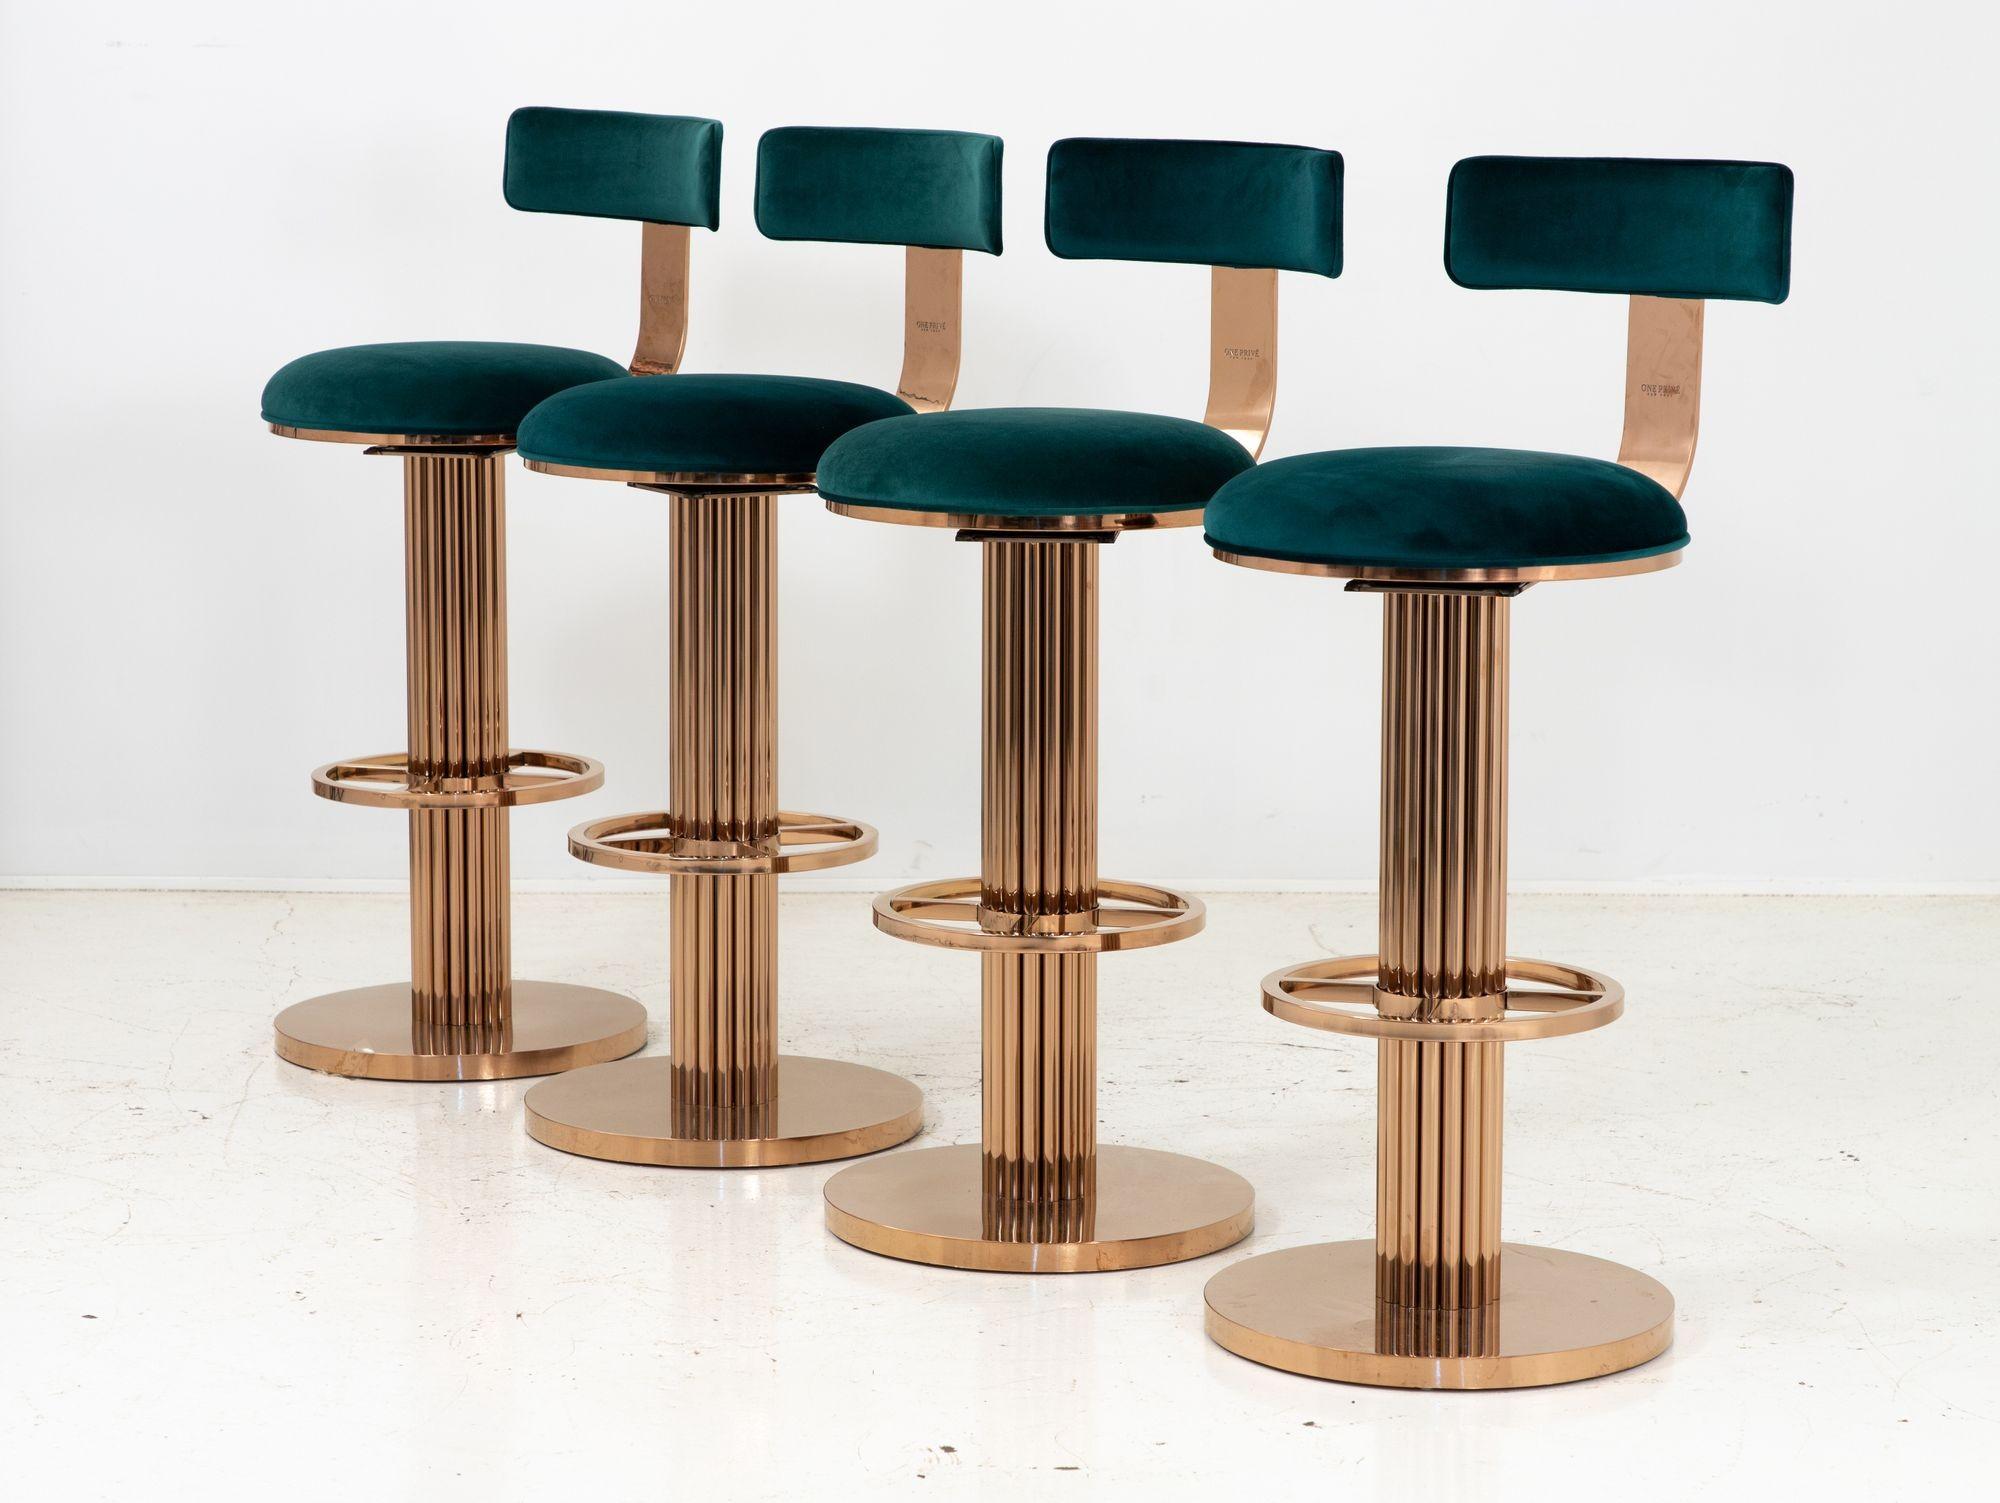 American Set of Four Rose Gold and Emerald Barstools in the Design For Leisure Style